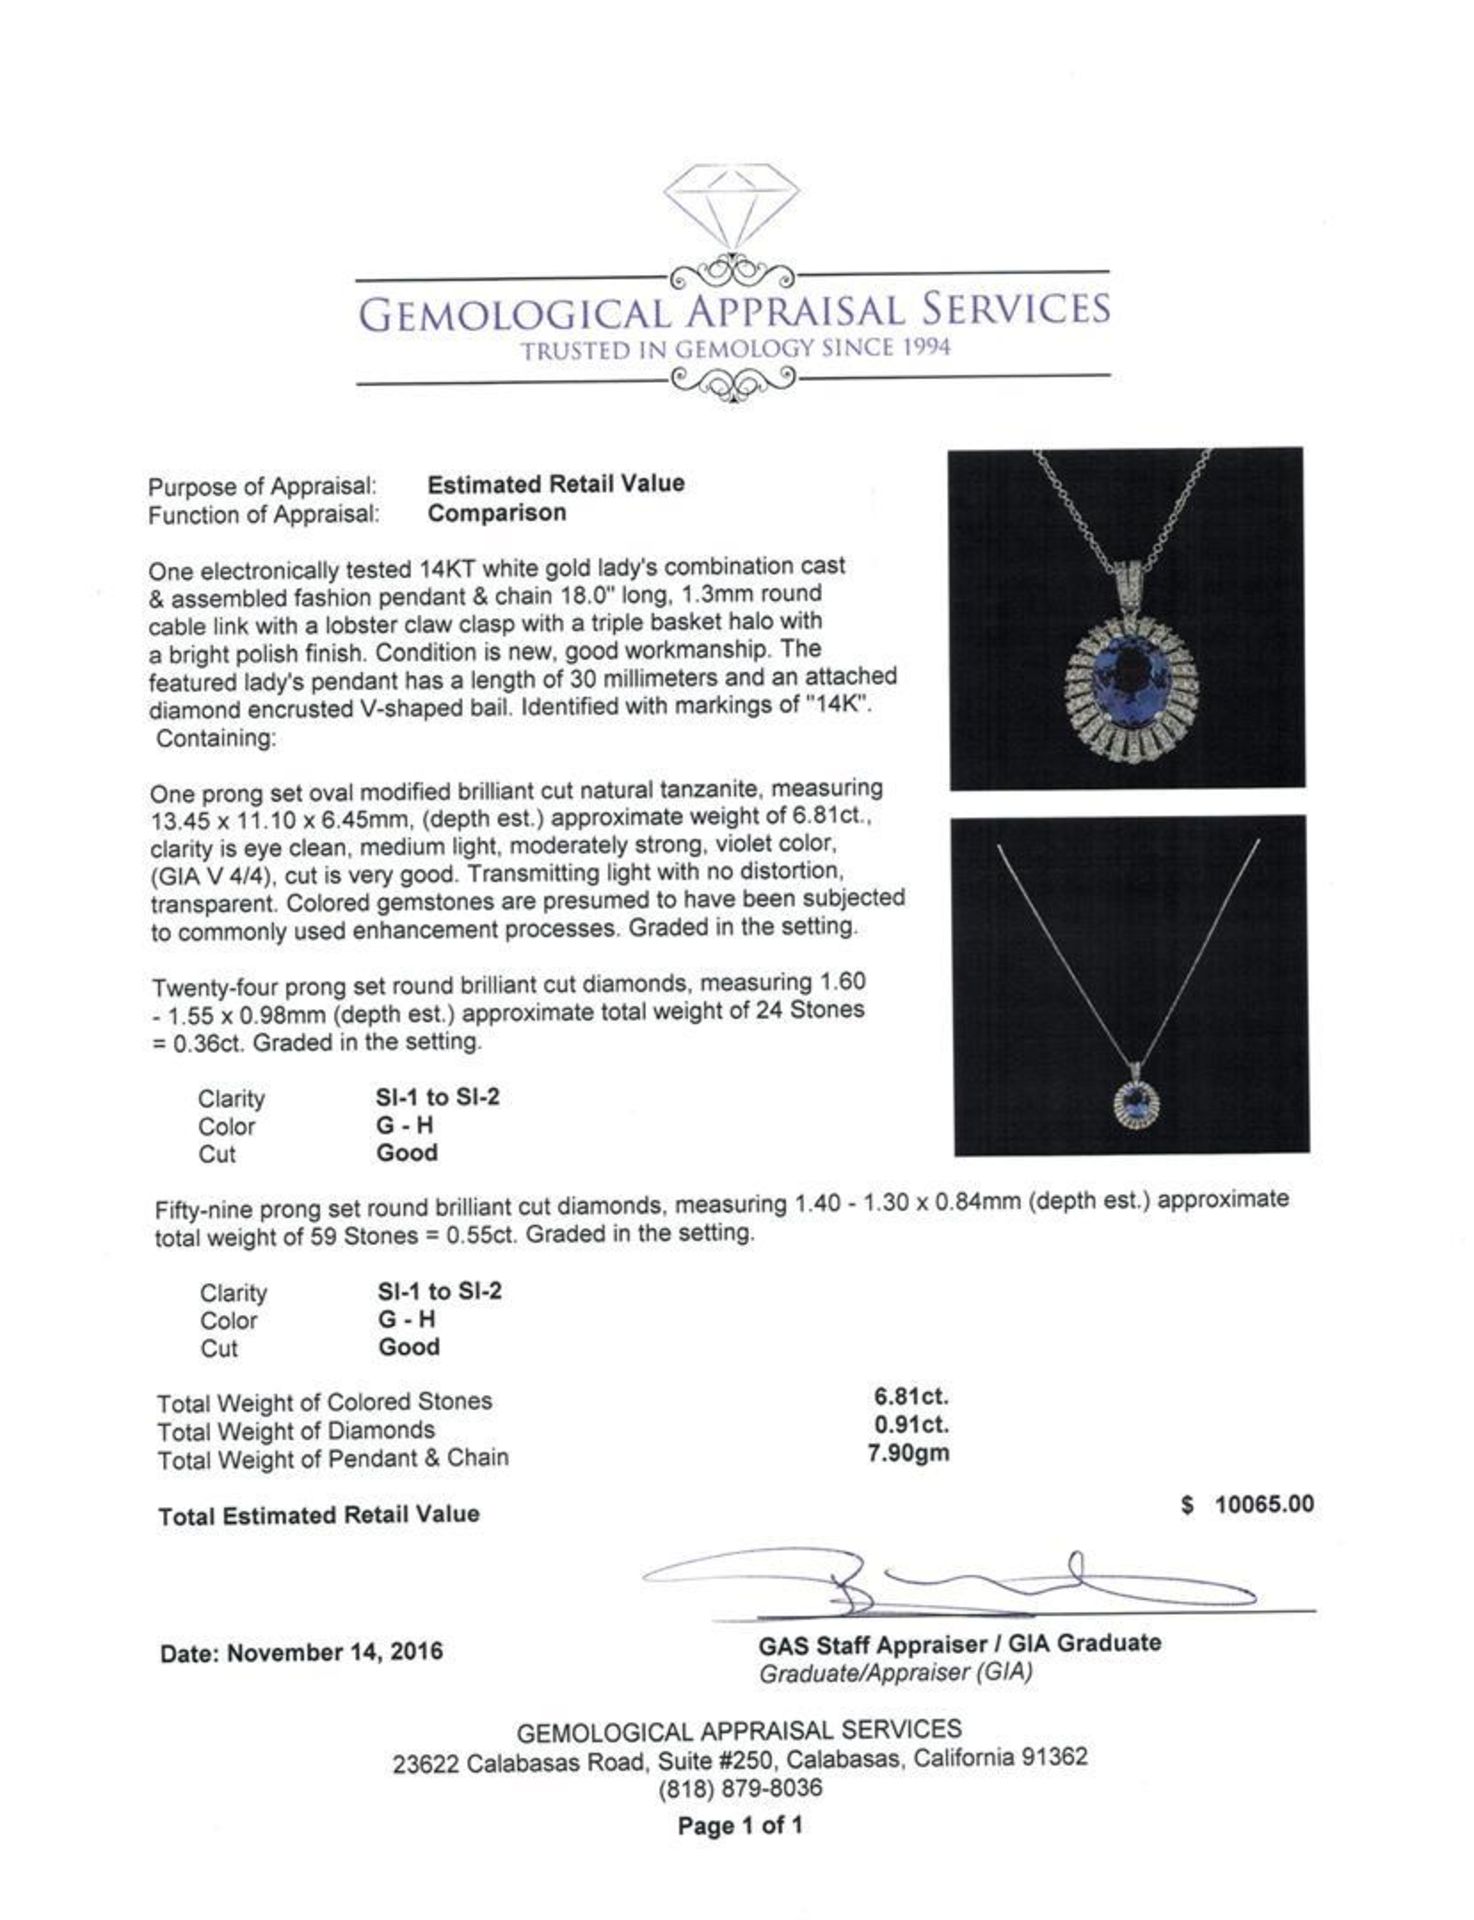 6.81 ctw Tanzanite and Diamond Pendant With Chain - 14KT White Gold - Image 3 of 3